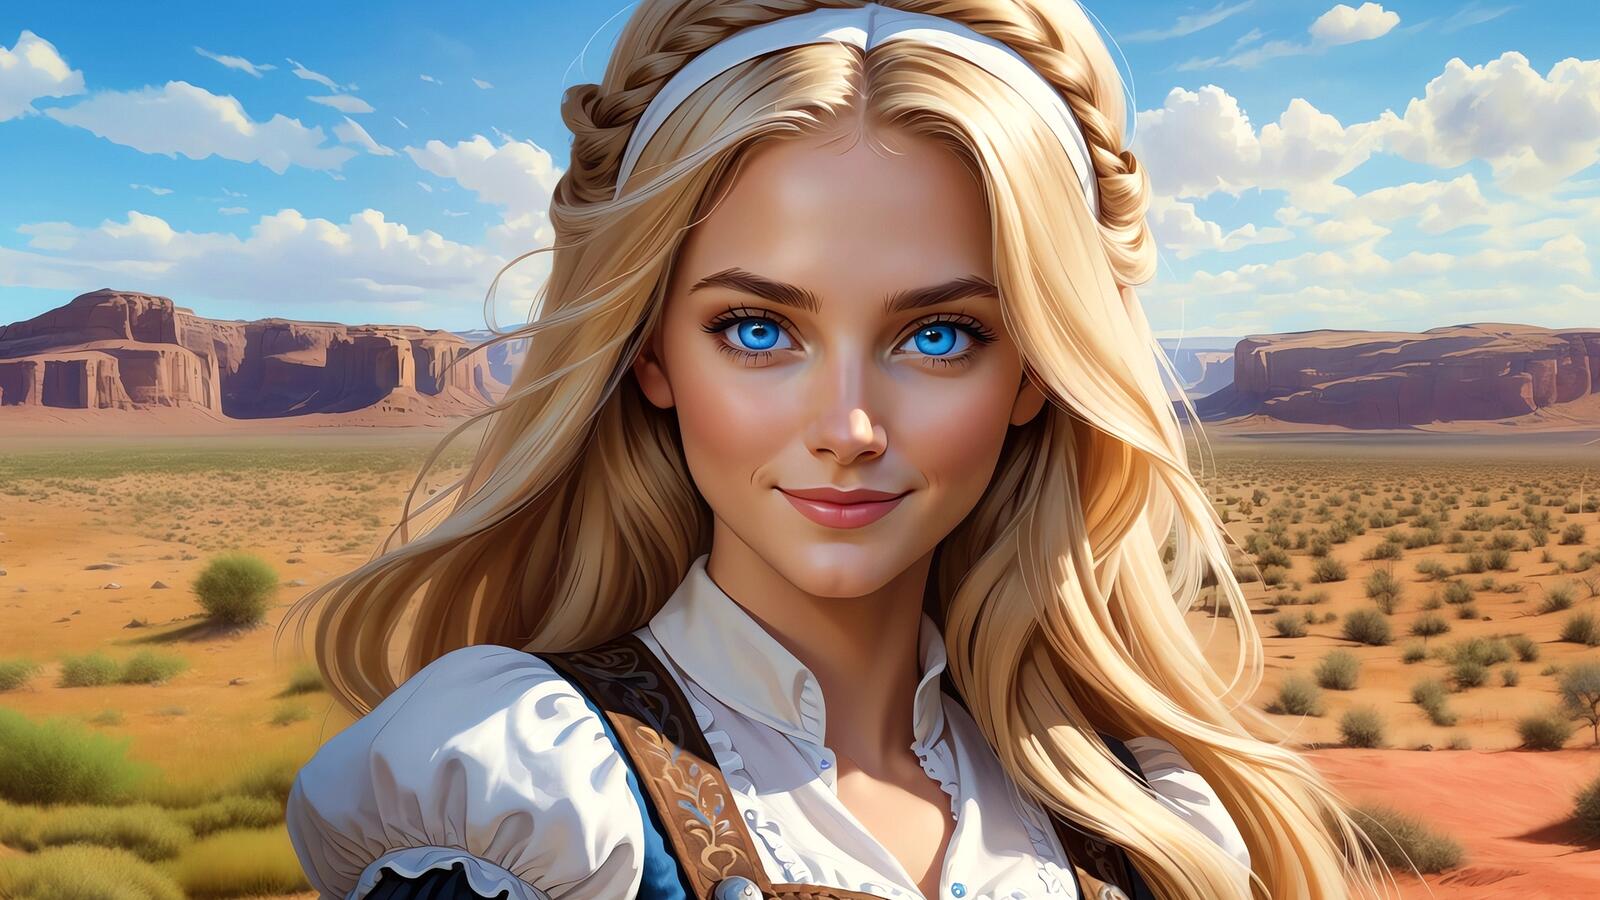 Free photo Portrait of a blonde girl against a desert background